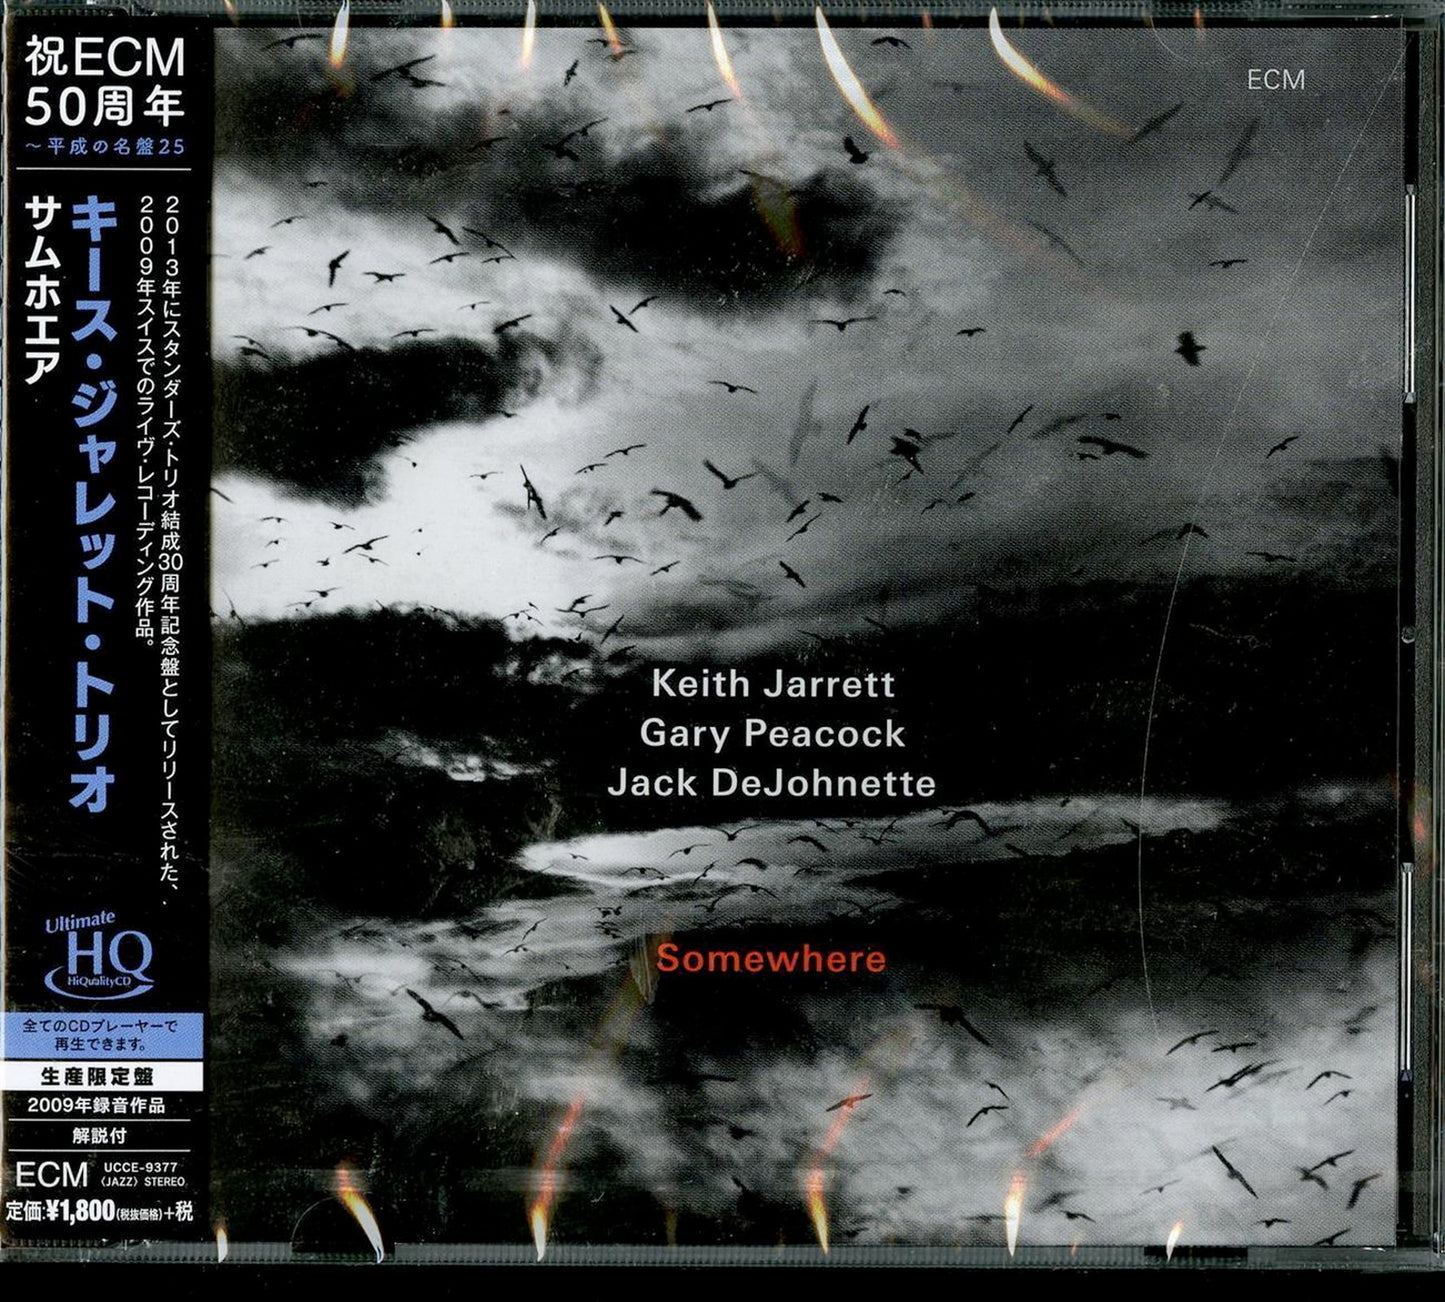 Keith Jarrett - Somewhere (Live In Lucerne / 2009) - UHQCD Limited Edition